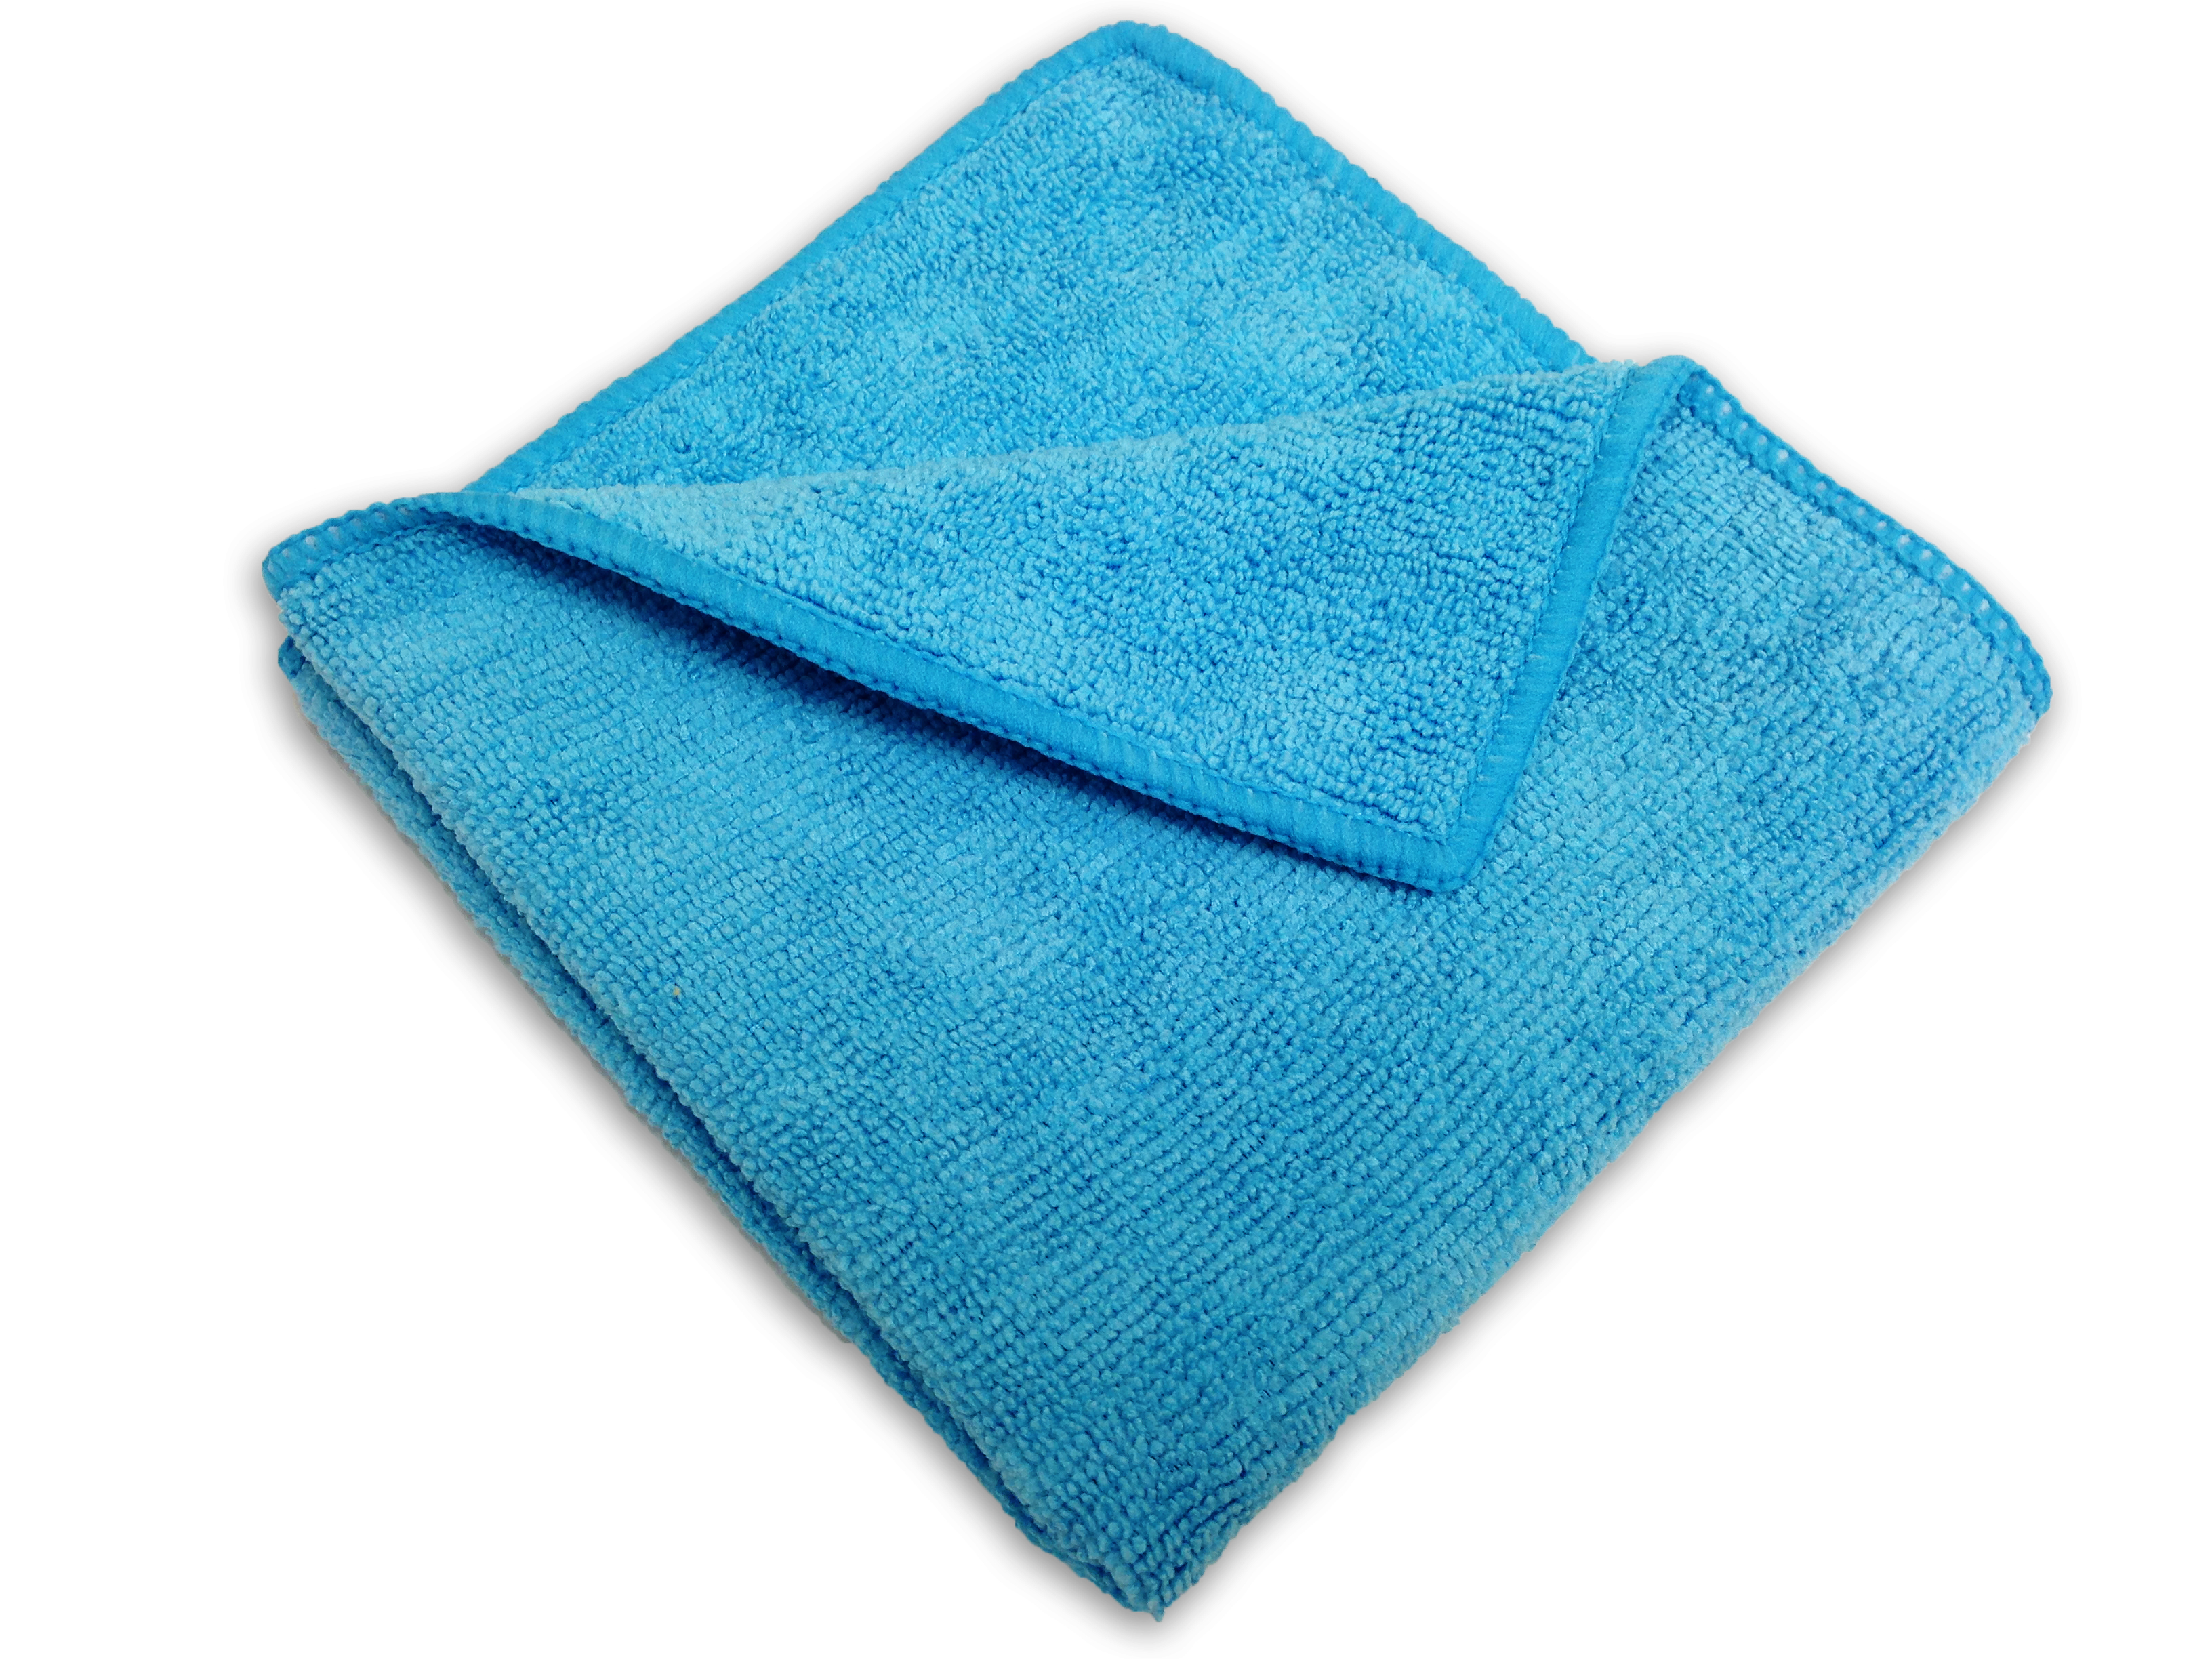 48 Microfiber 14"x14" Cleaning Cloths Detailing Polishing Towels Rags 300GSM 